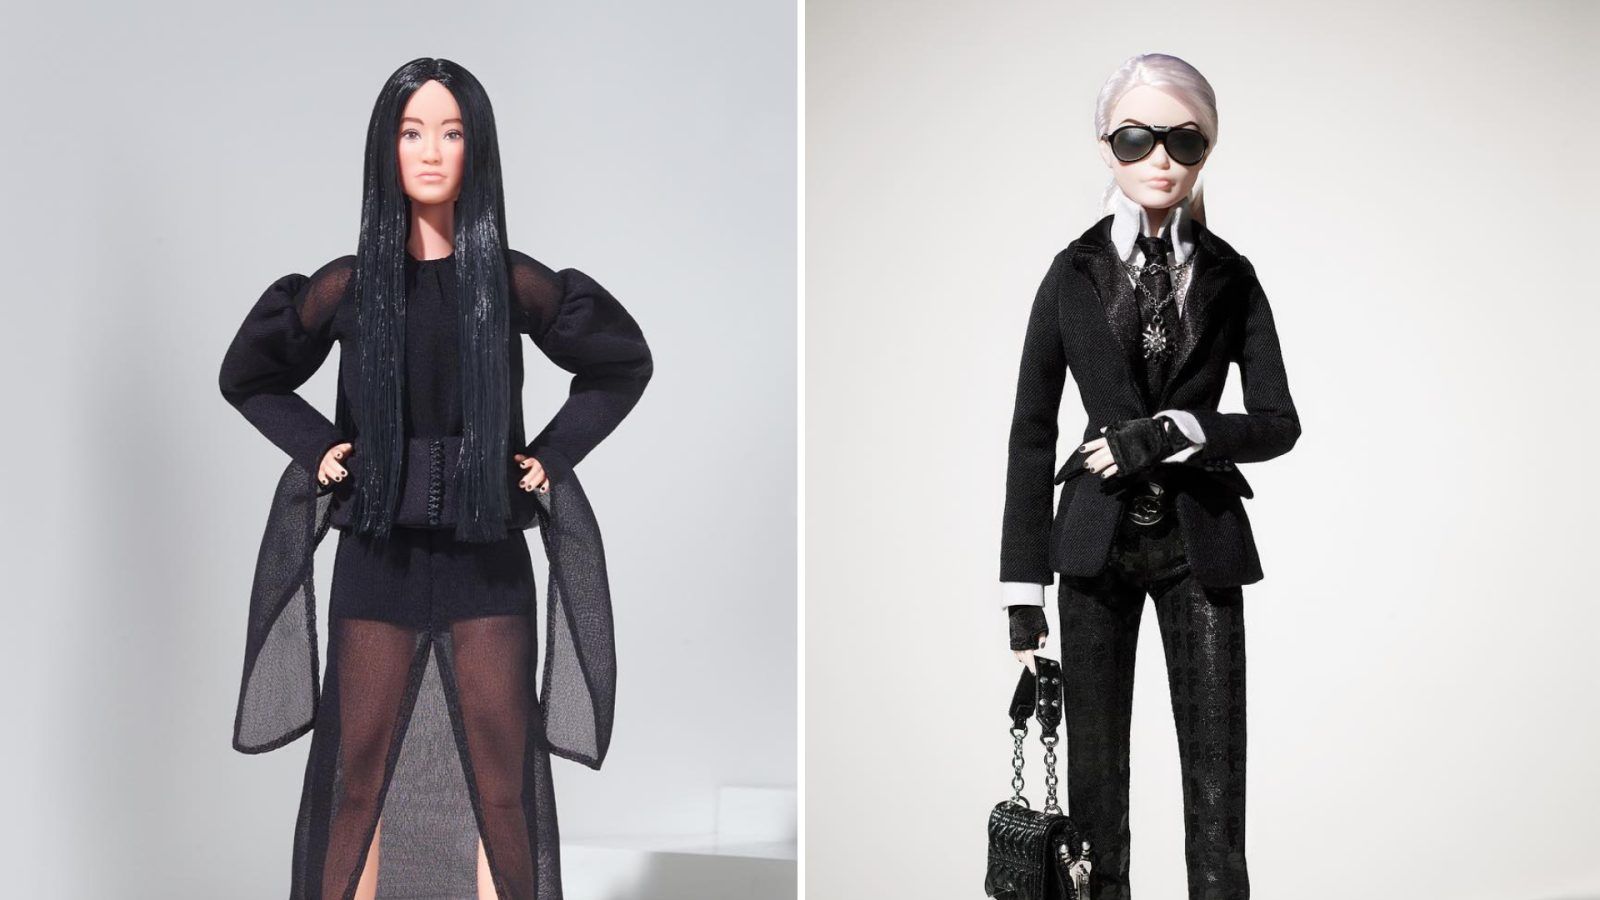 A look at Barbie’s biggest fashion collaborations and their iconic styles